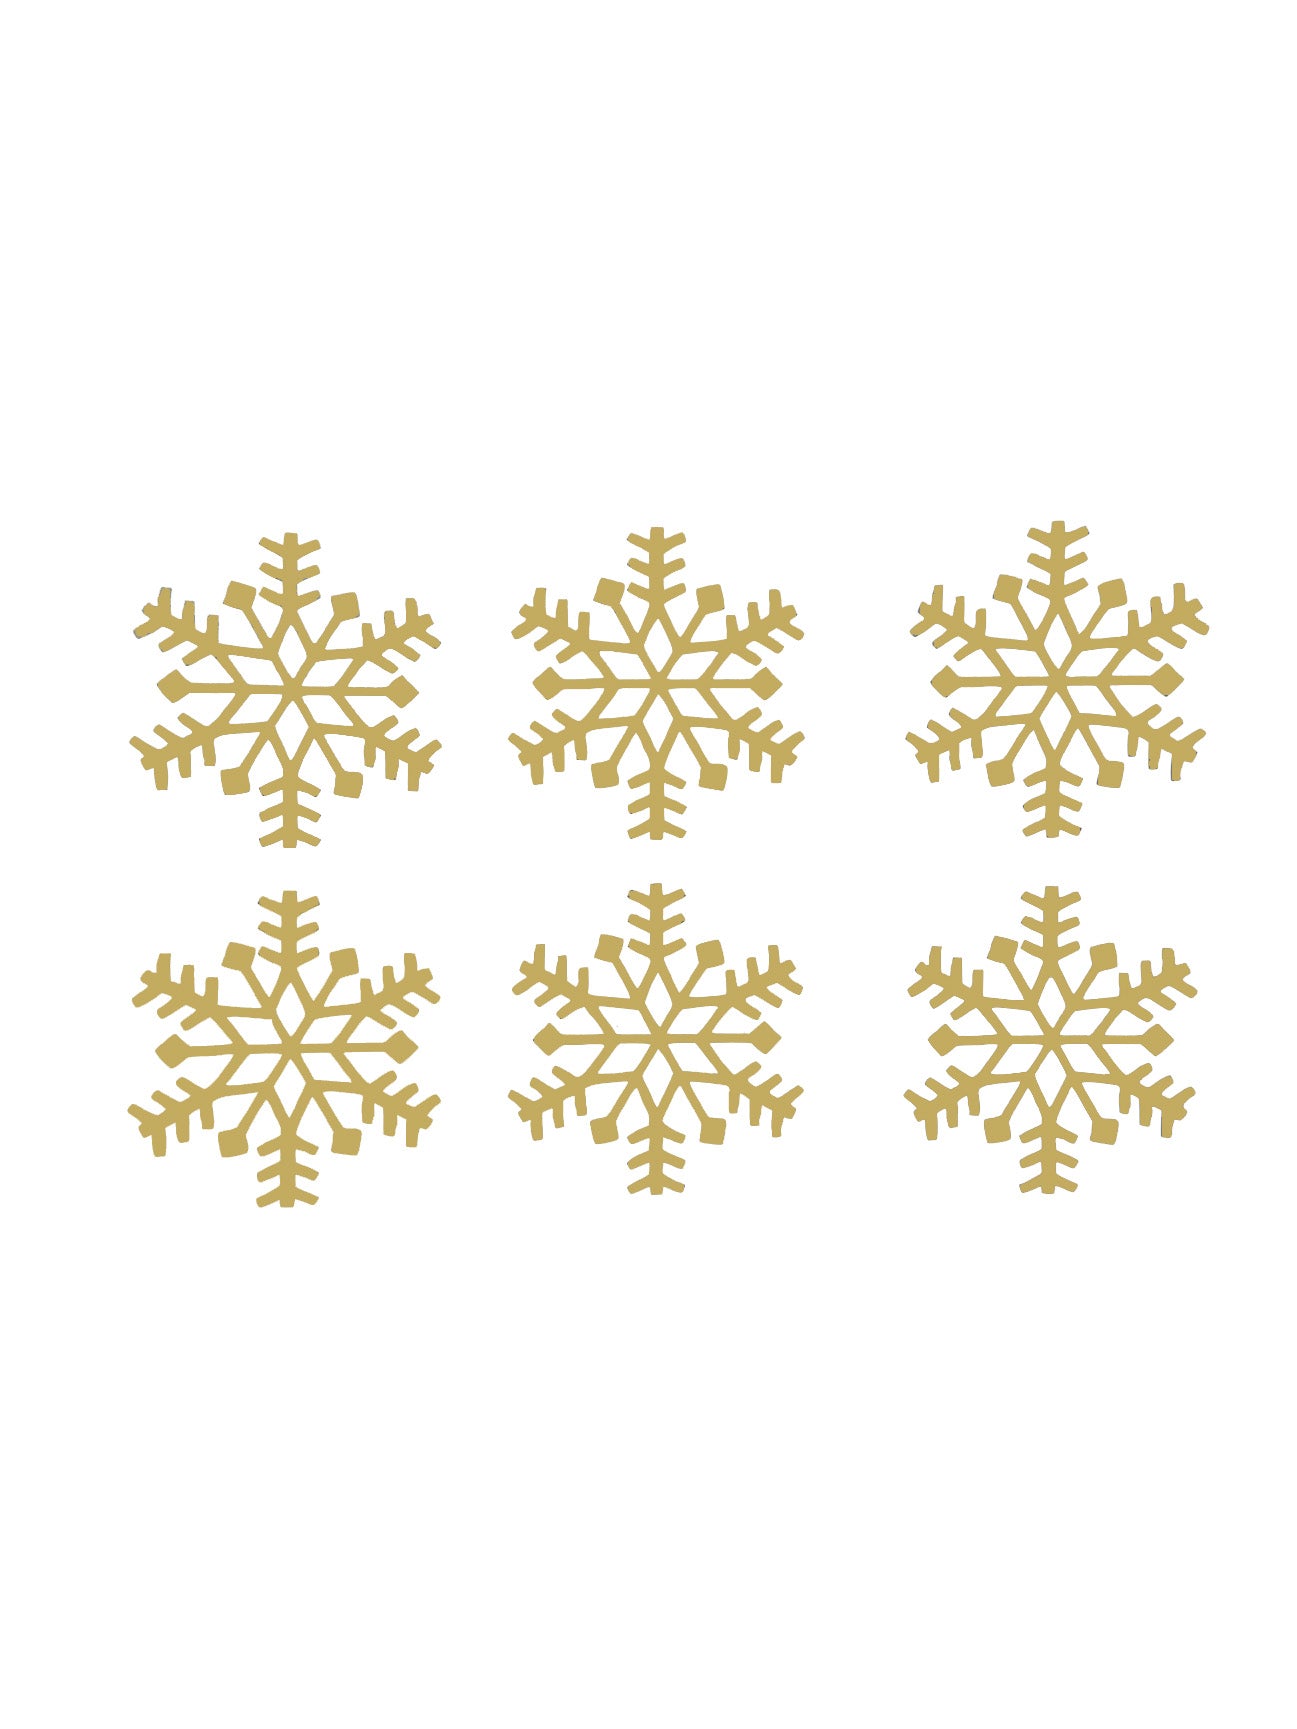 6x Christmas Snowflake Vinyl Sticker Decals - Ideal for Wine Glasses / Champagne Glasses / Tableware